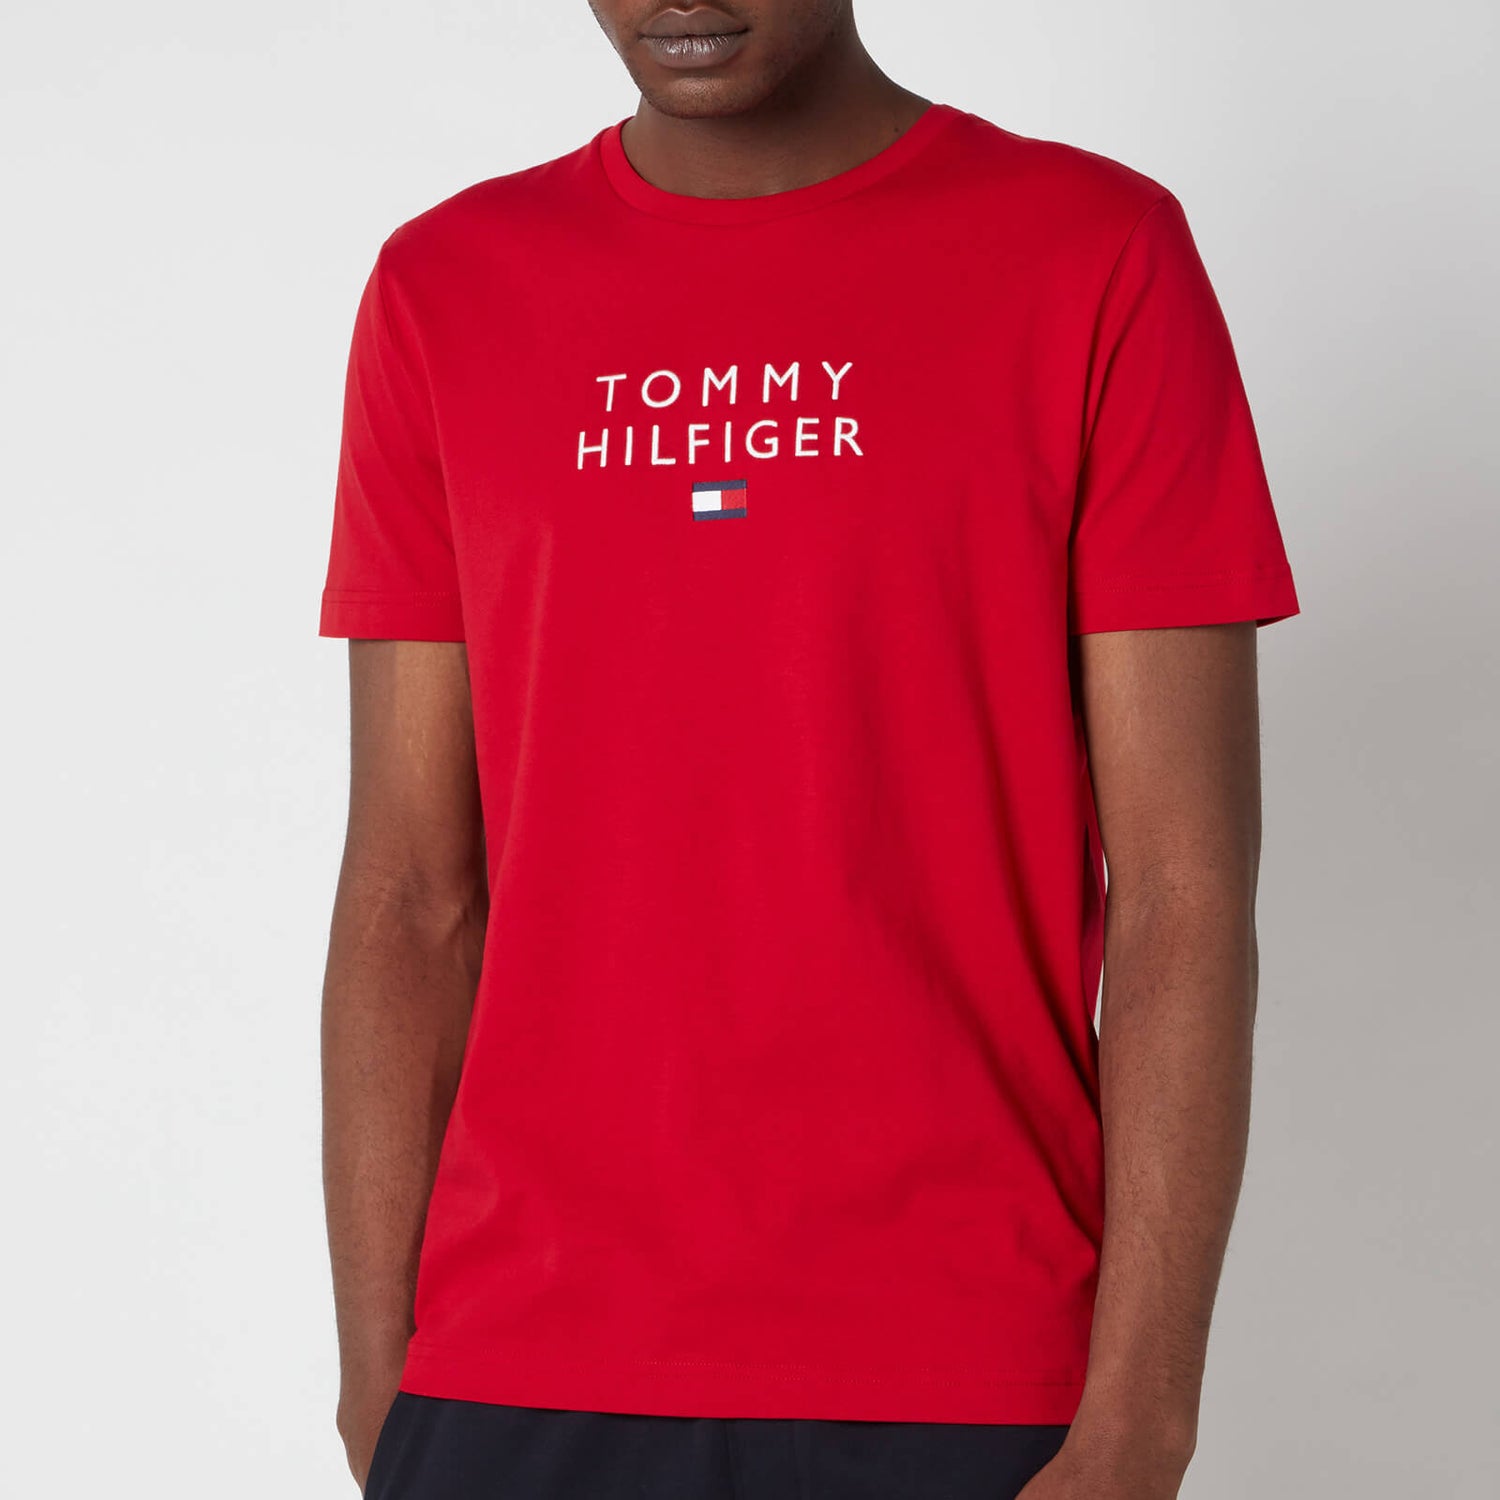 Tommy Hilfiger Men's Stacked Flag T-Shirt - Primary Red